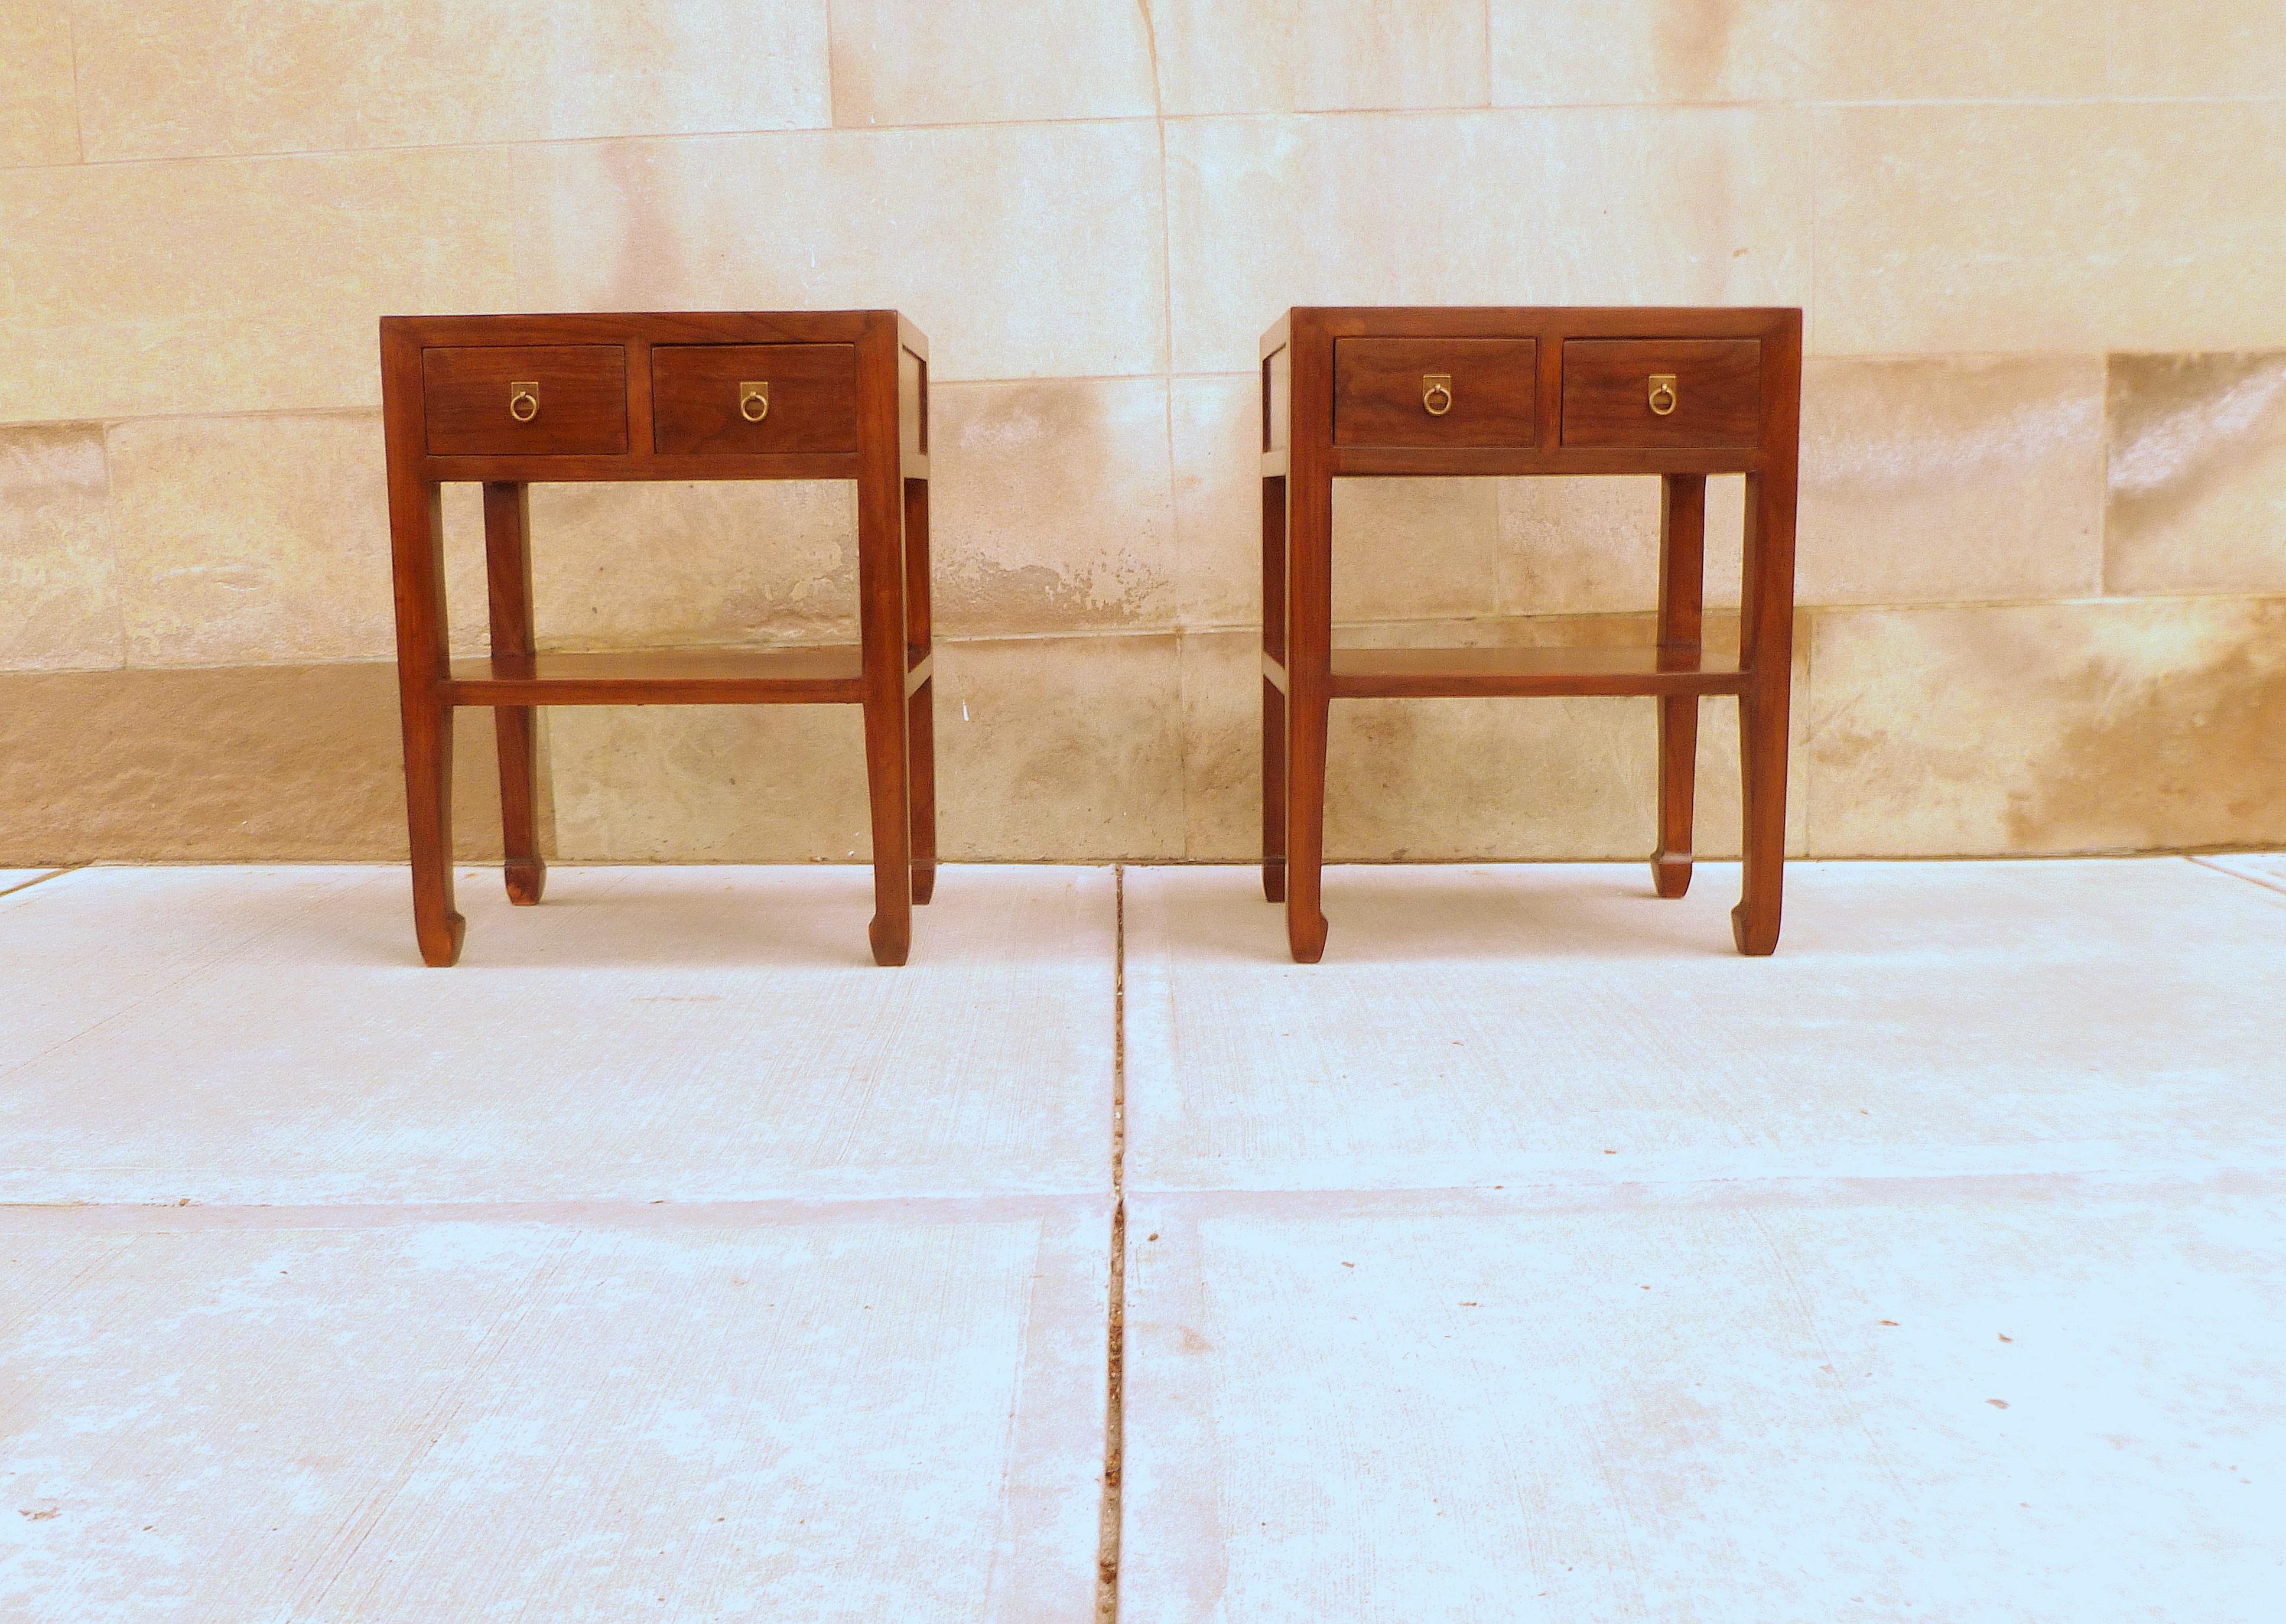 Pair of fine Jumu end tables, with drawers and shelf. Very elegant and fine quality and beautiful color. We carry fine quality furniture with elegant finished and has been appeared many times in 